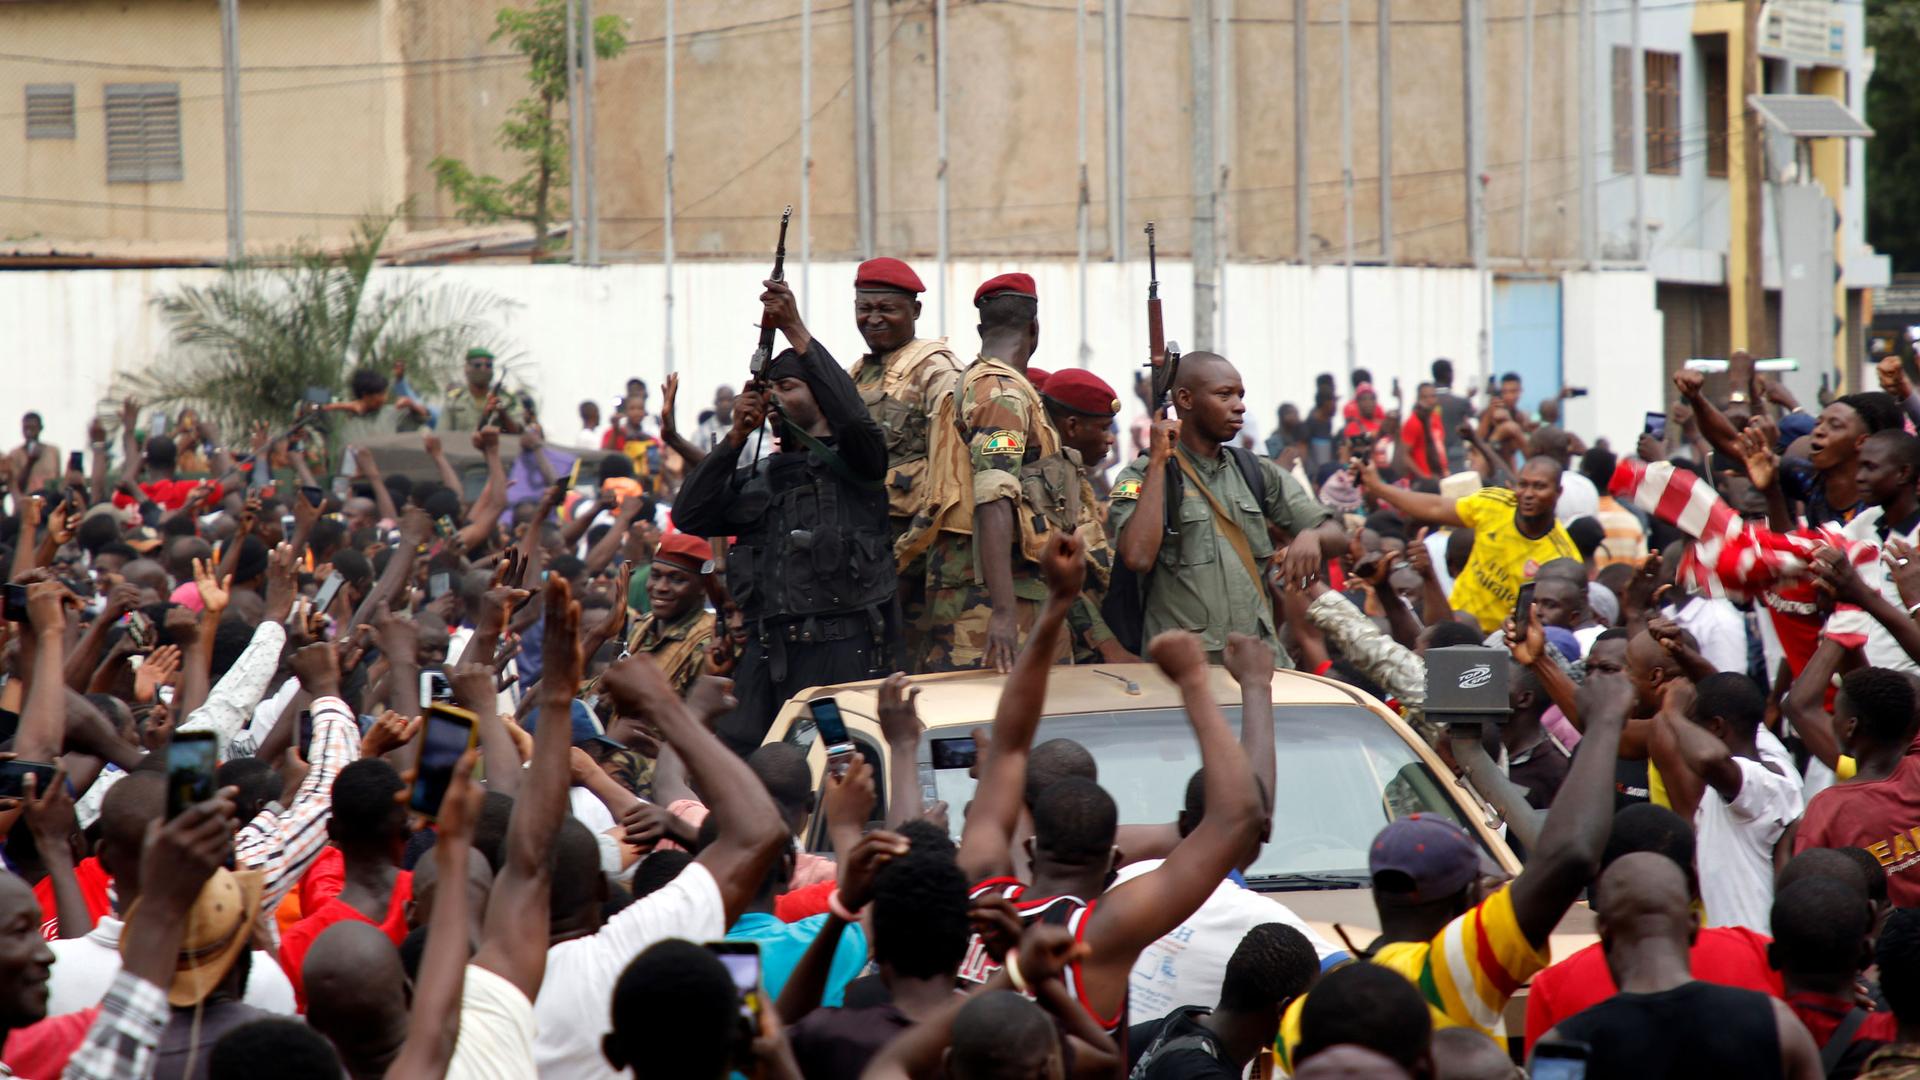 A large crowd of people are shown with their hands in the air cheering a group of armed soldiers in a car.